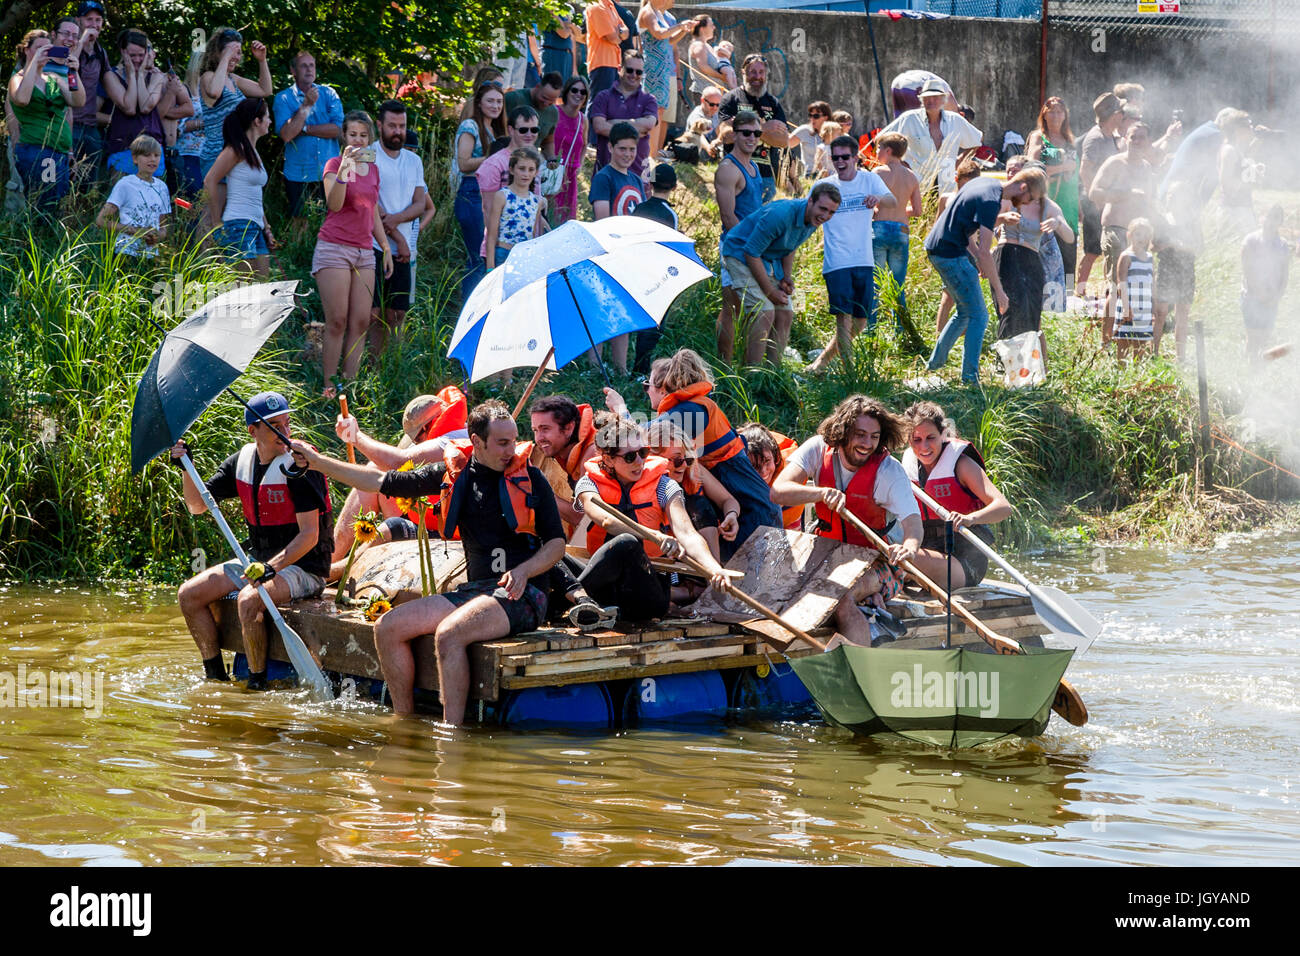 The Annual Lewes Raft Race On The River Ouse. The Participants In Home Made Rafts Are Traditionally Pelted with Eggs and Flour By Onlookers, Lewes, UK Stock Photo